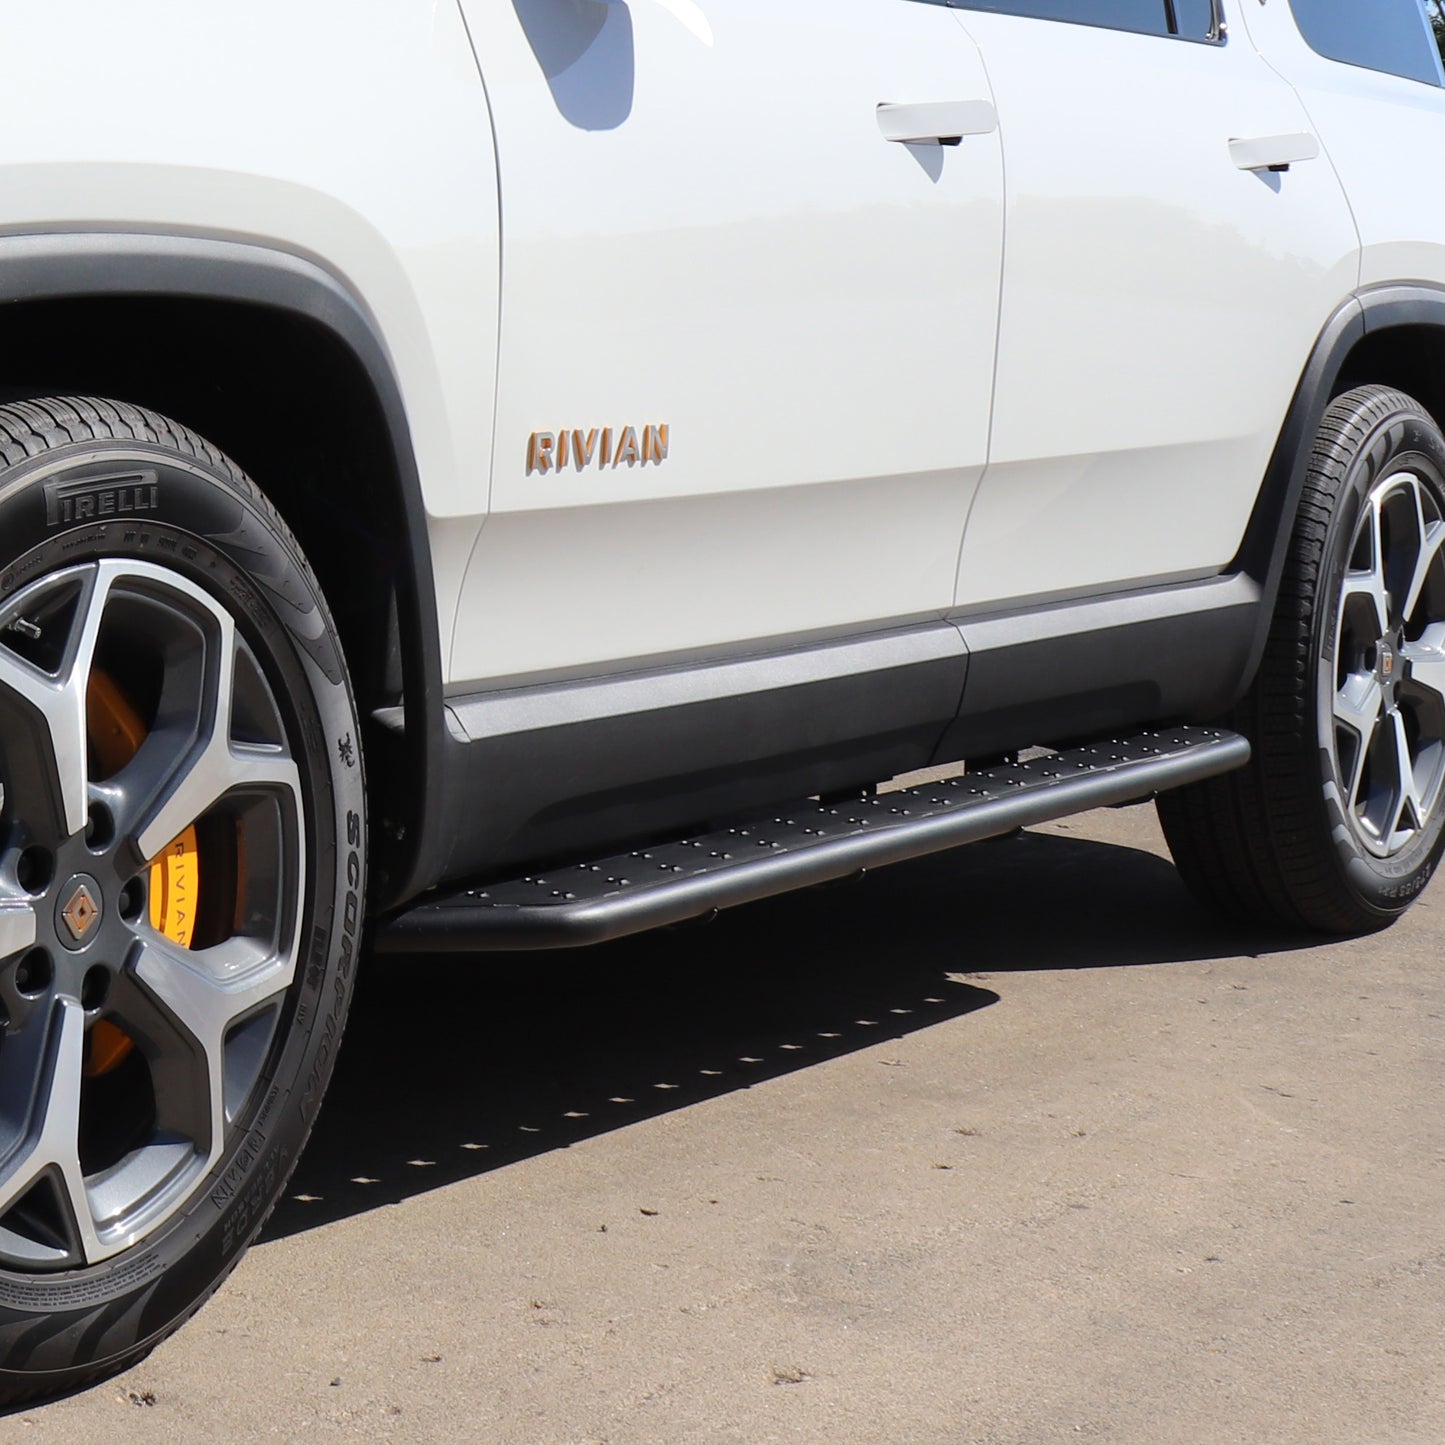 Rivian SUV (R1S) / Truck (R1T) Stainless Steel Running Boards